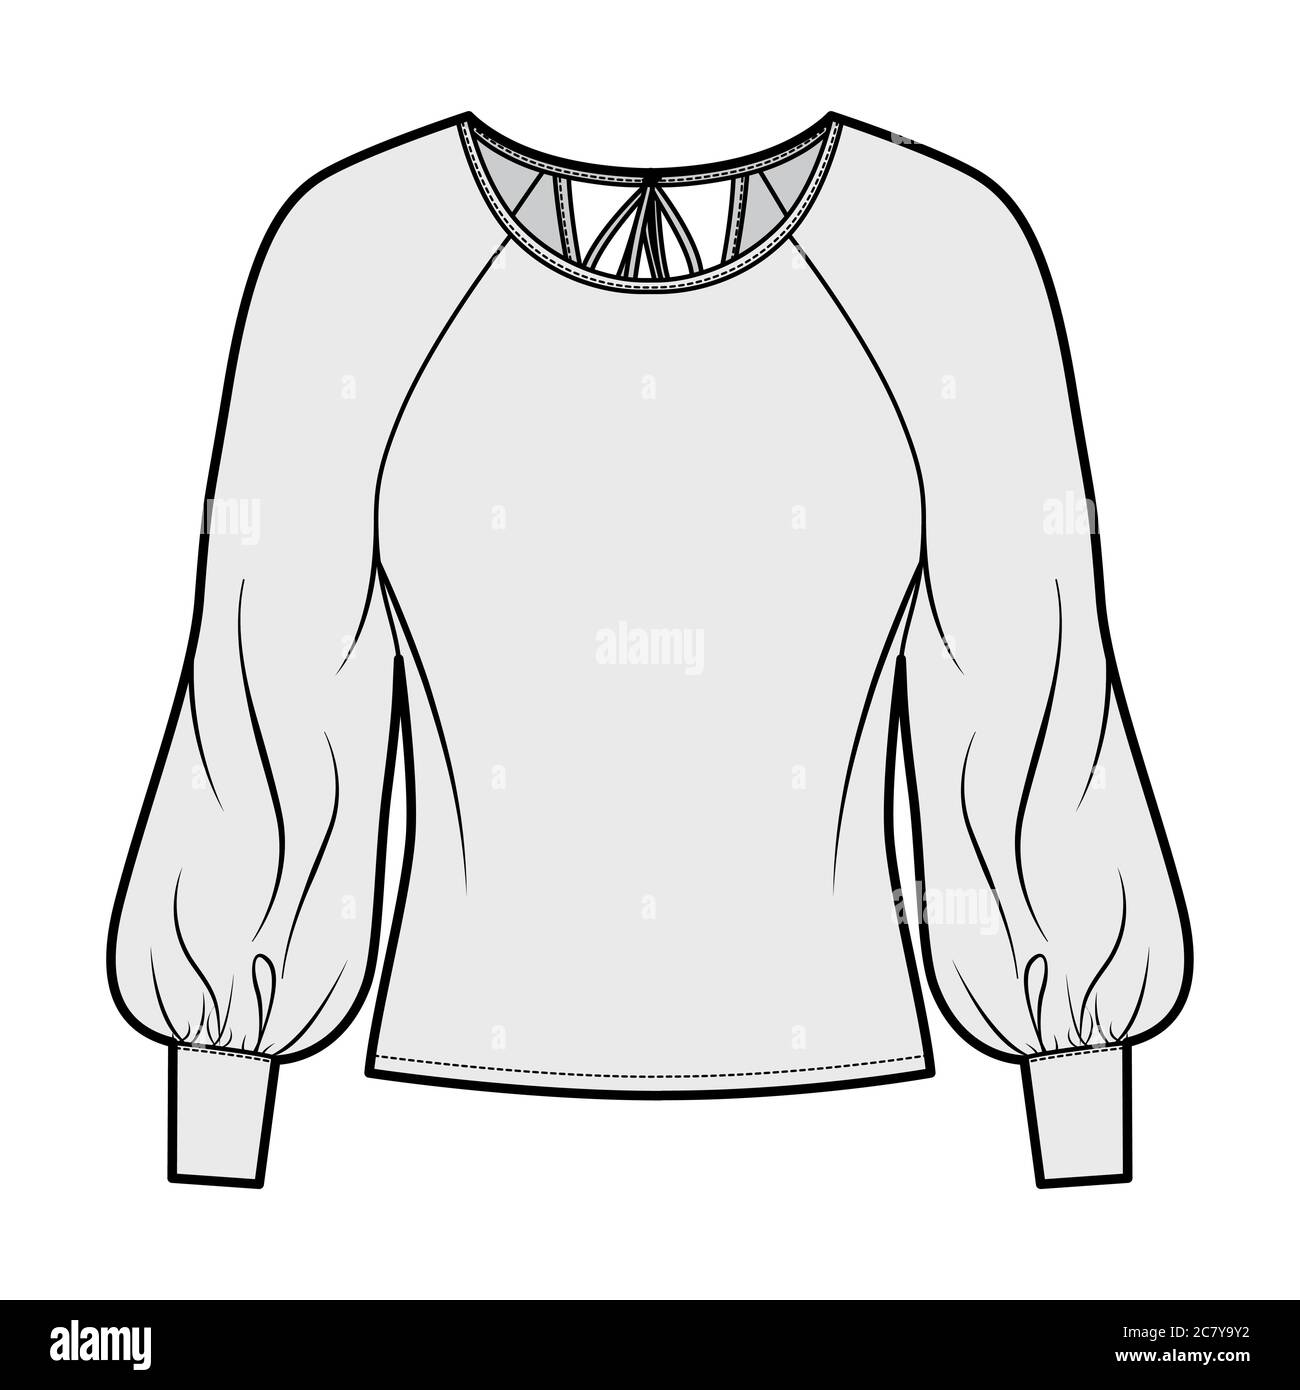 Blouse technical fashion illustration with wide round neck, exaggerated balloon raglan sleeves. sleeves, ties at back. Flat apparel shirt template front, grey color. Women men unisex top CAD Stock Vector